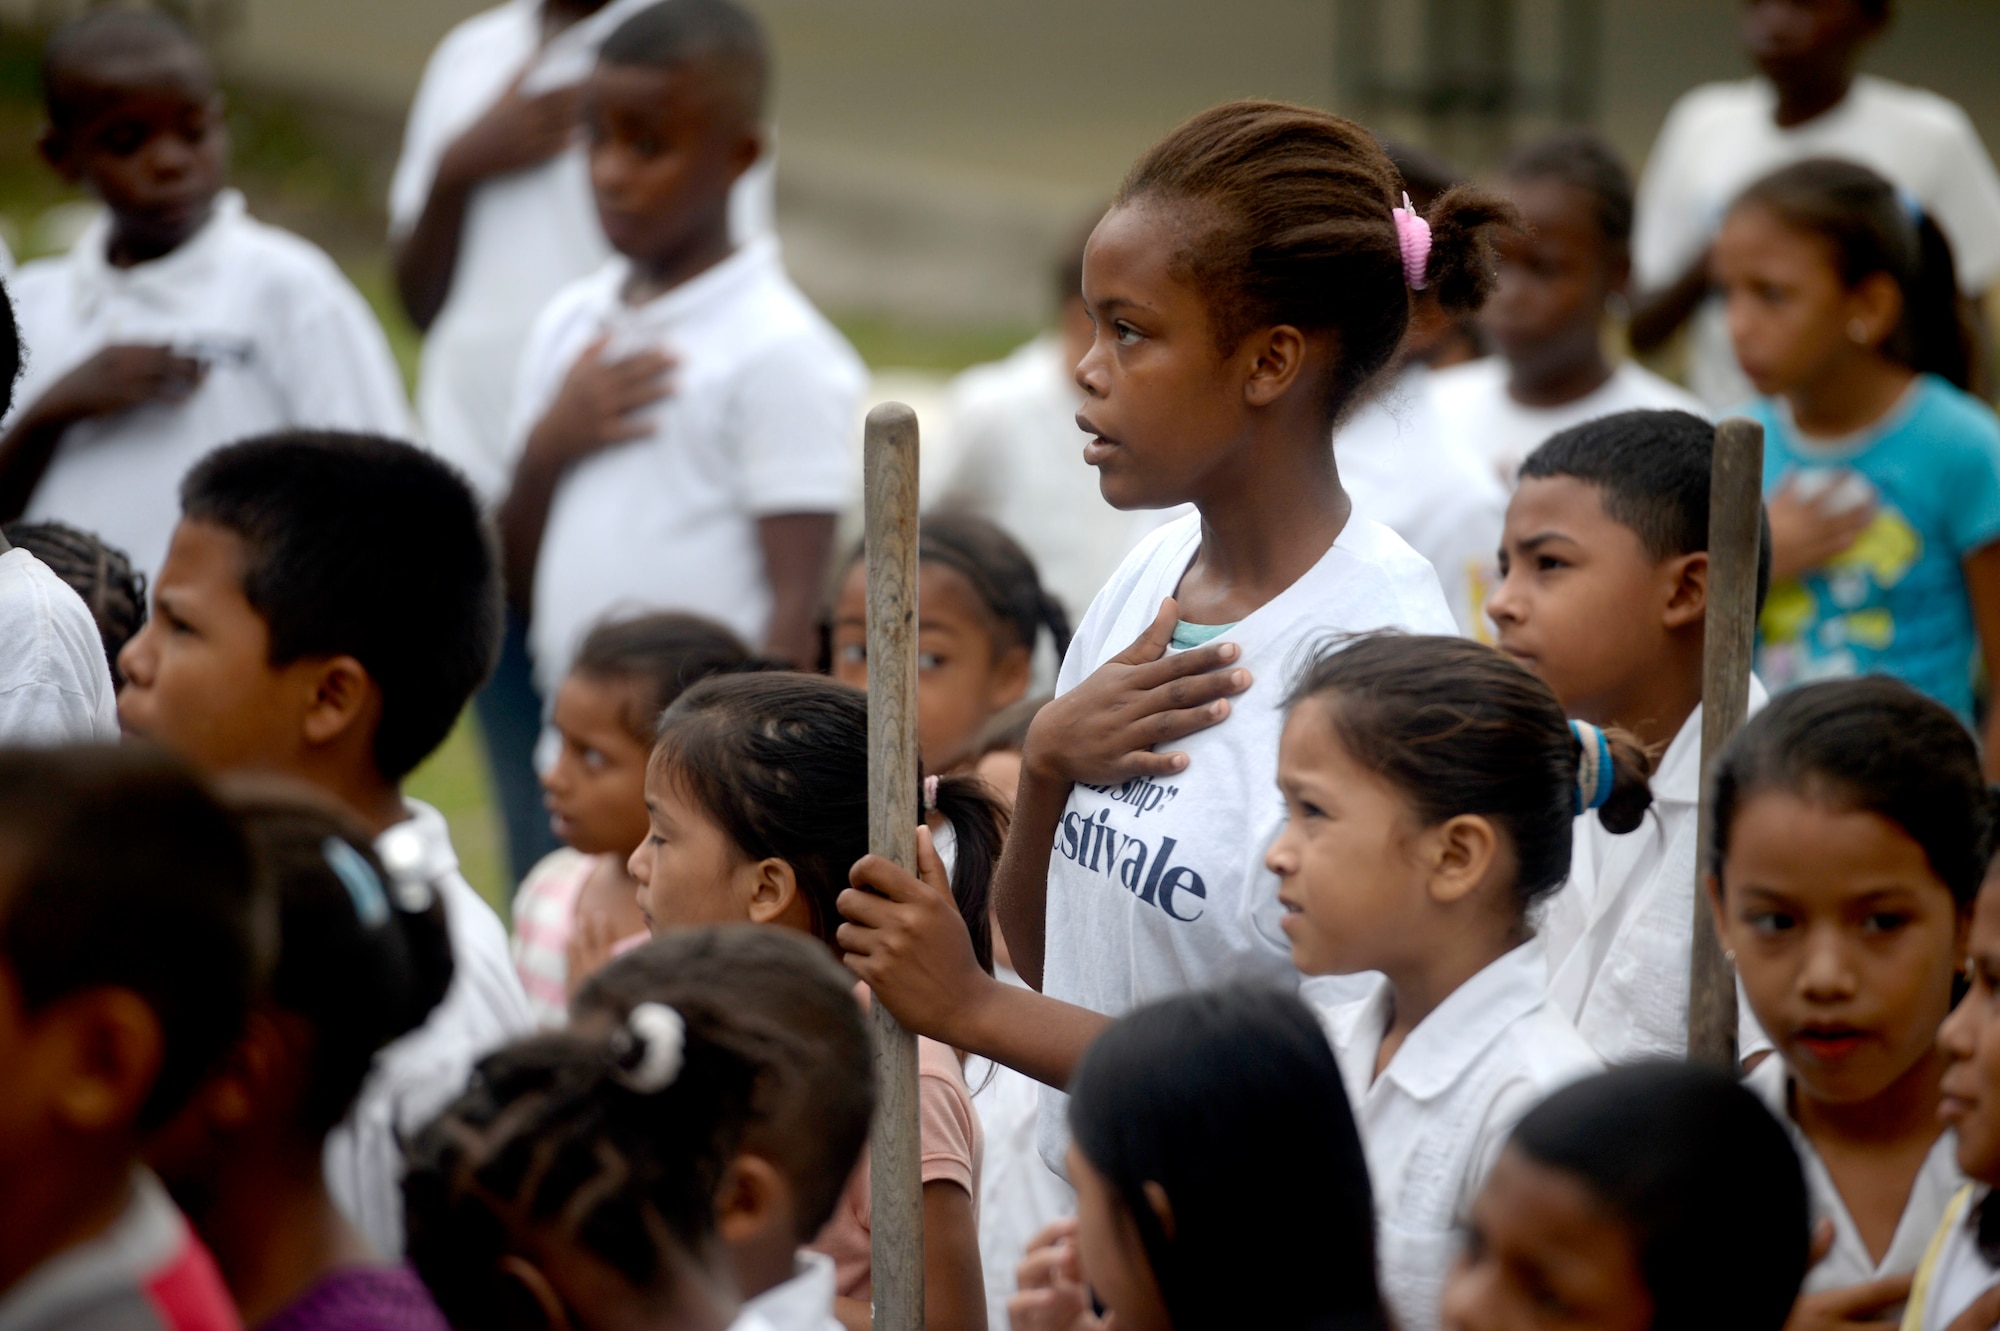 Students sing the Honduran national anthem during the National Tree Day celebration at Rafeal Peneda Ponce School in Trujillo, Honduras, June 19, 2015. NEW HORIZONS Honduras 2015 personnel were at the event in between providing support throughout the Trujillo and Tocoa regions of Honduras by building a new two-classroom schoolhouse in Ocotes Alto, drilling a well in Honduras Aguan, and proving general medical support. NEW HORIZONS was launched in the 1980s and is an annual joint humanitarian assistance exercise that U.S. Southern Command conducts with a partner nation in Central America, South America or the Caribbean. The exercise improves joint training readiness of U.S. and partner nation civil engineers, medical professionals and support personnel through humanitarian assistance activities. (U.S. Air Force photo by Capt. David J. Murphy/Released)